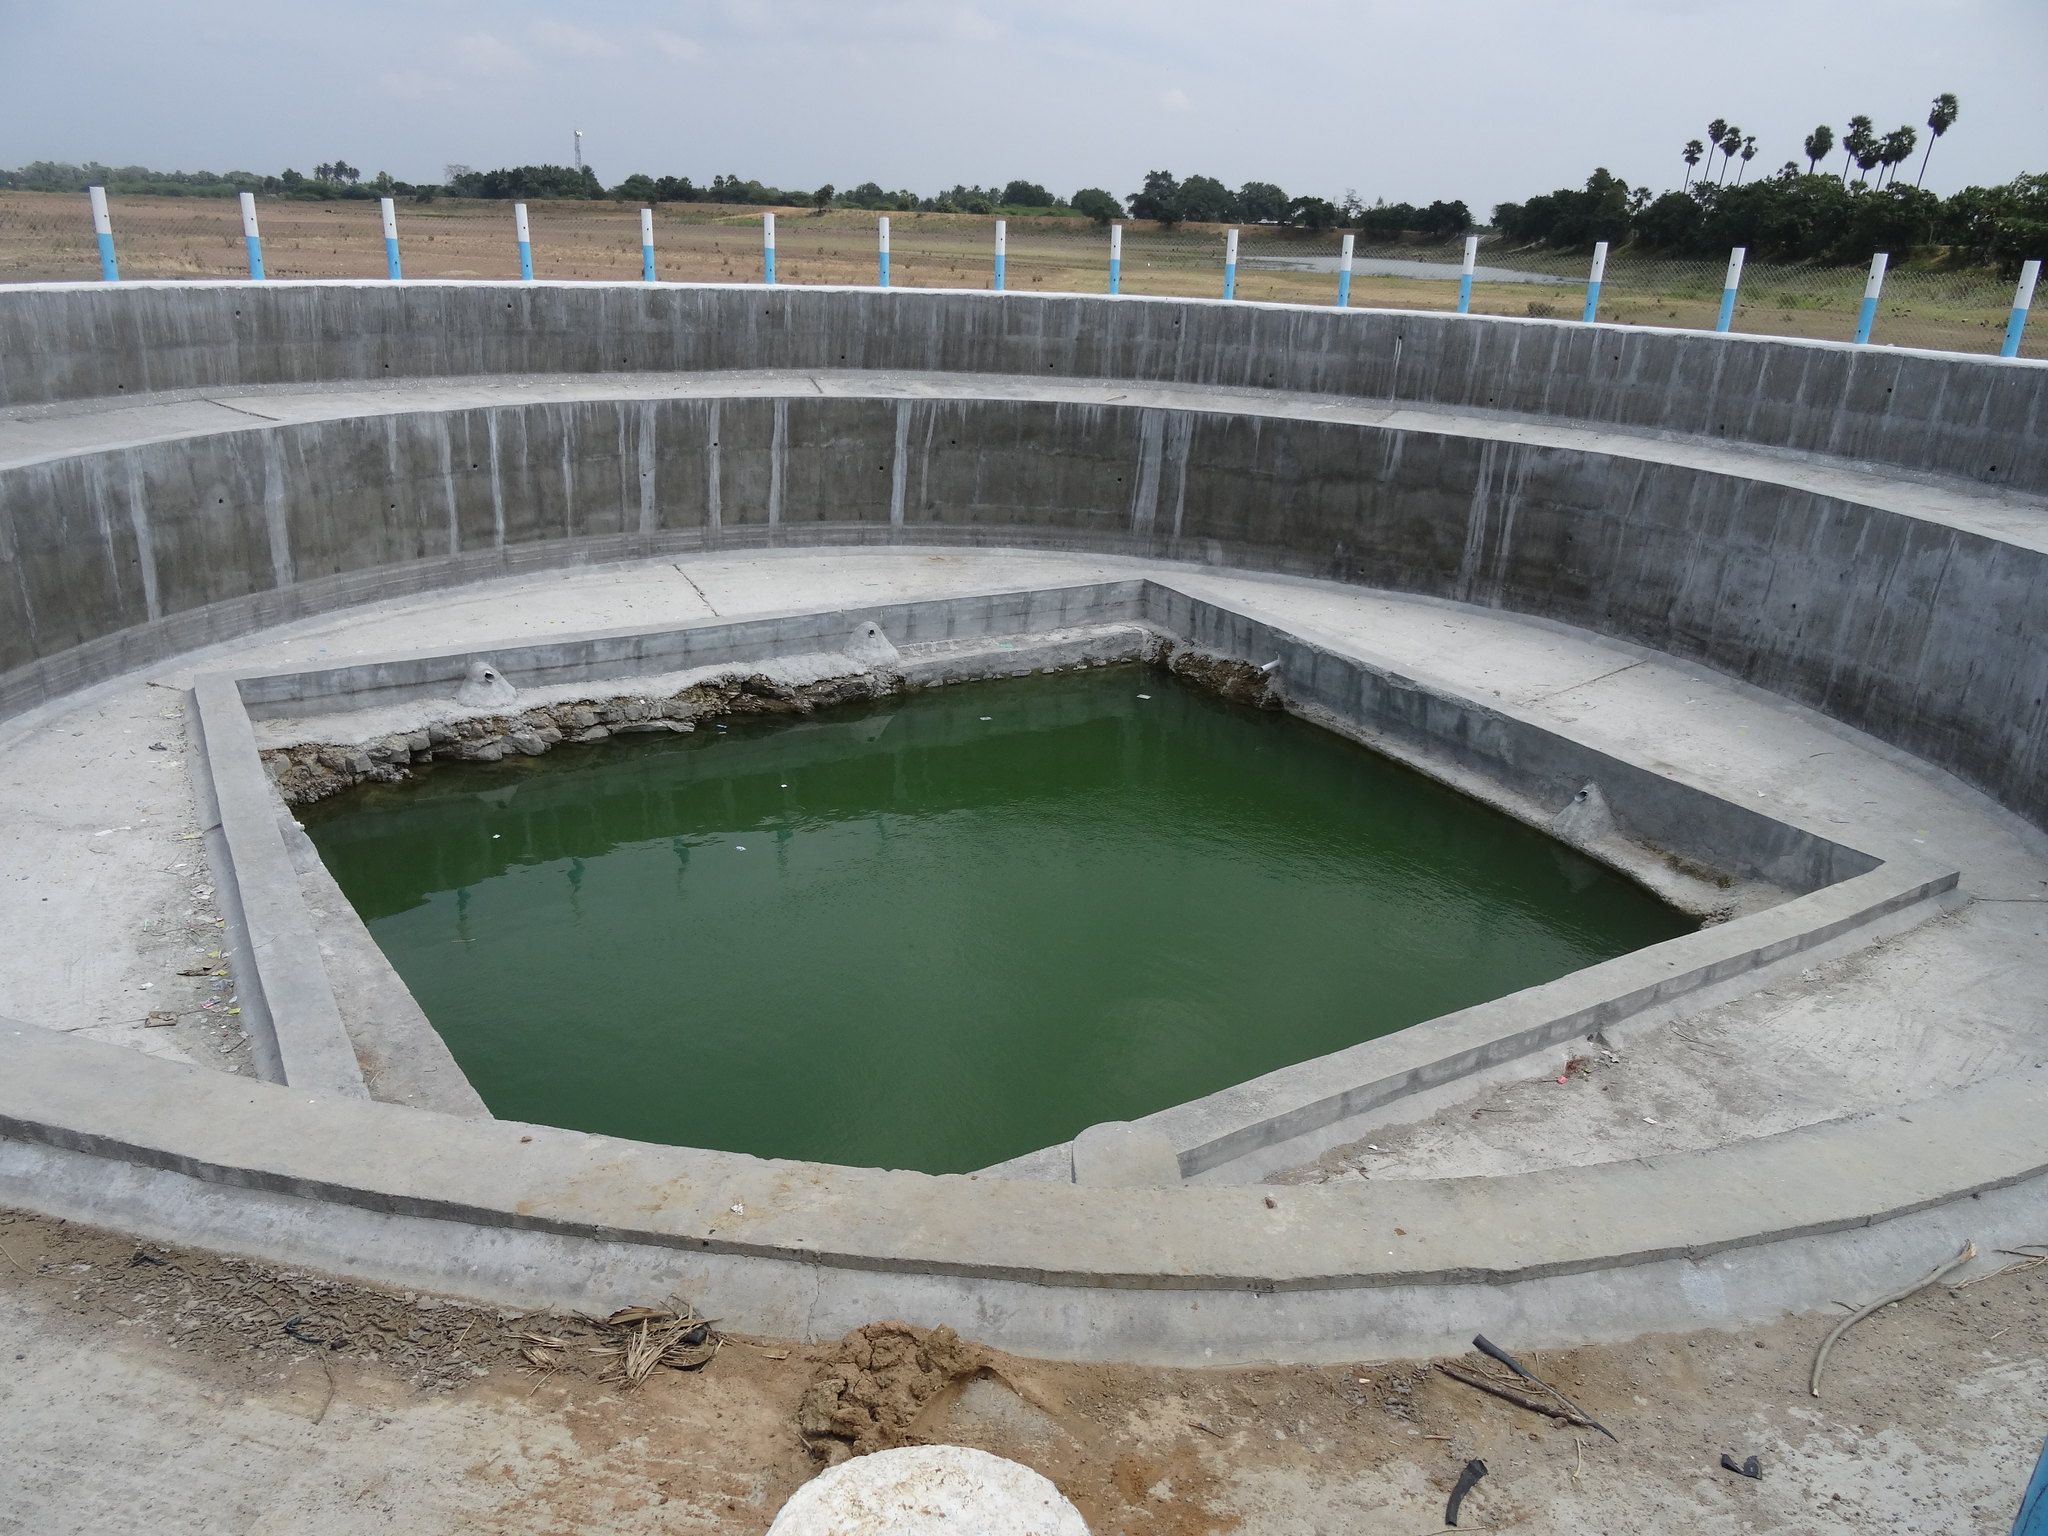 Recharge shafts to increase groundwater resources and prevent depletion within the tank of Kylianur, India (Image: Audrey Richard/ Water Alternatives, Flickr Commons, CC BY-NC 2.0)